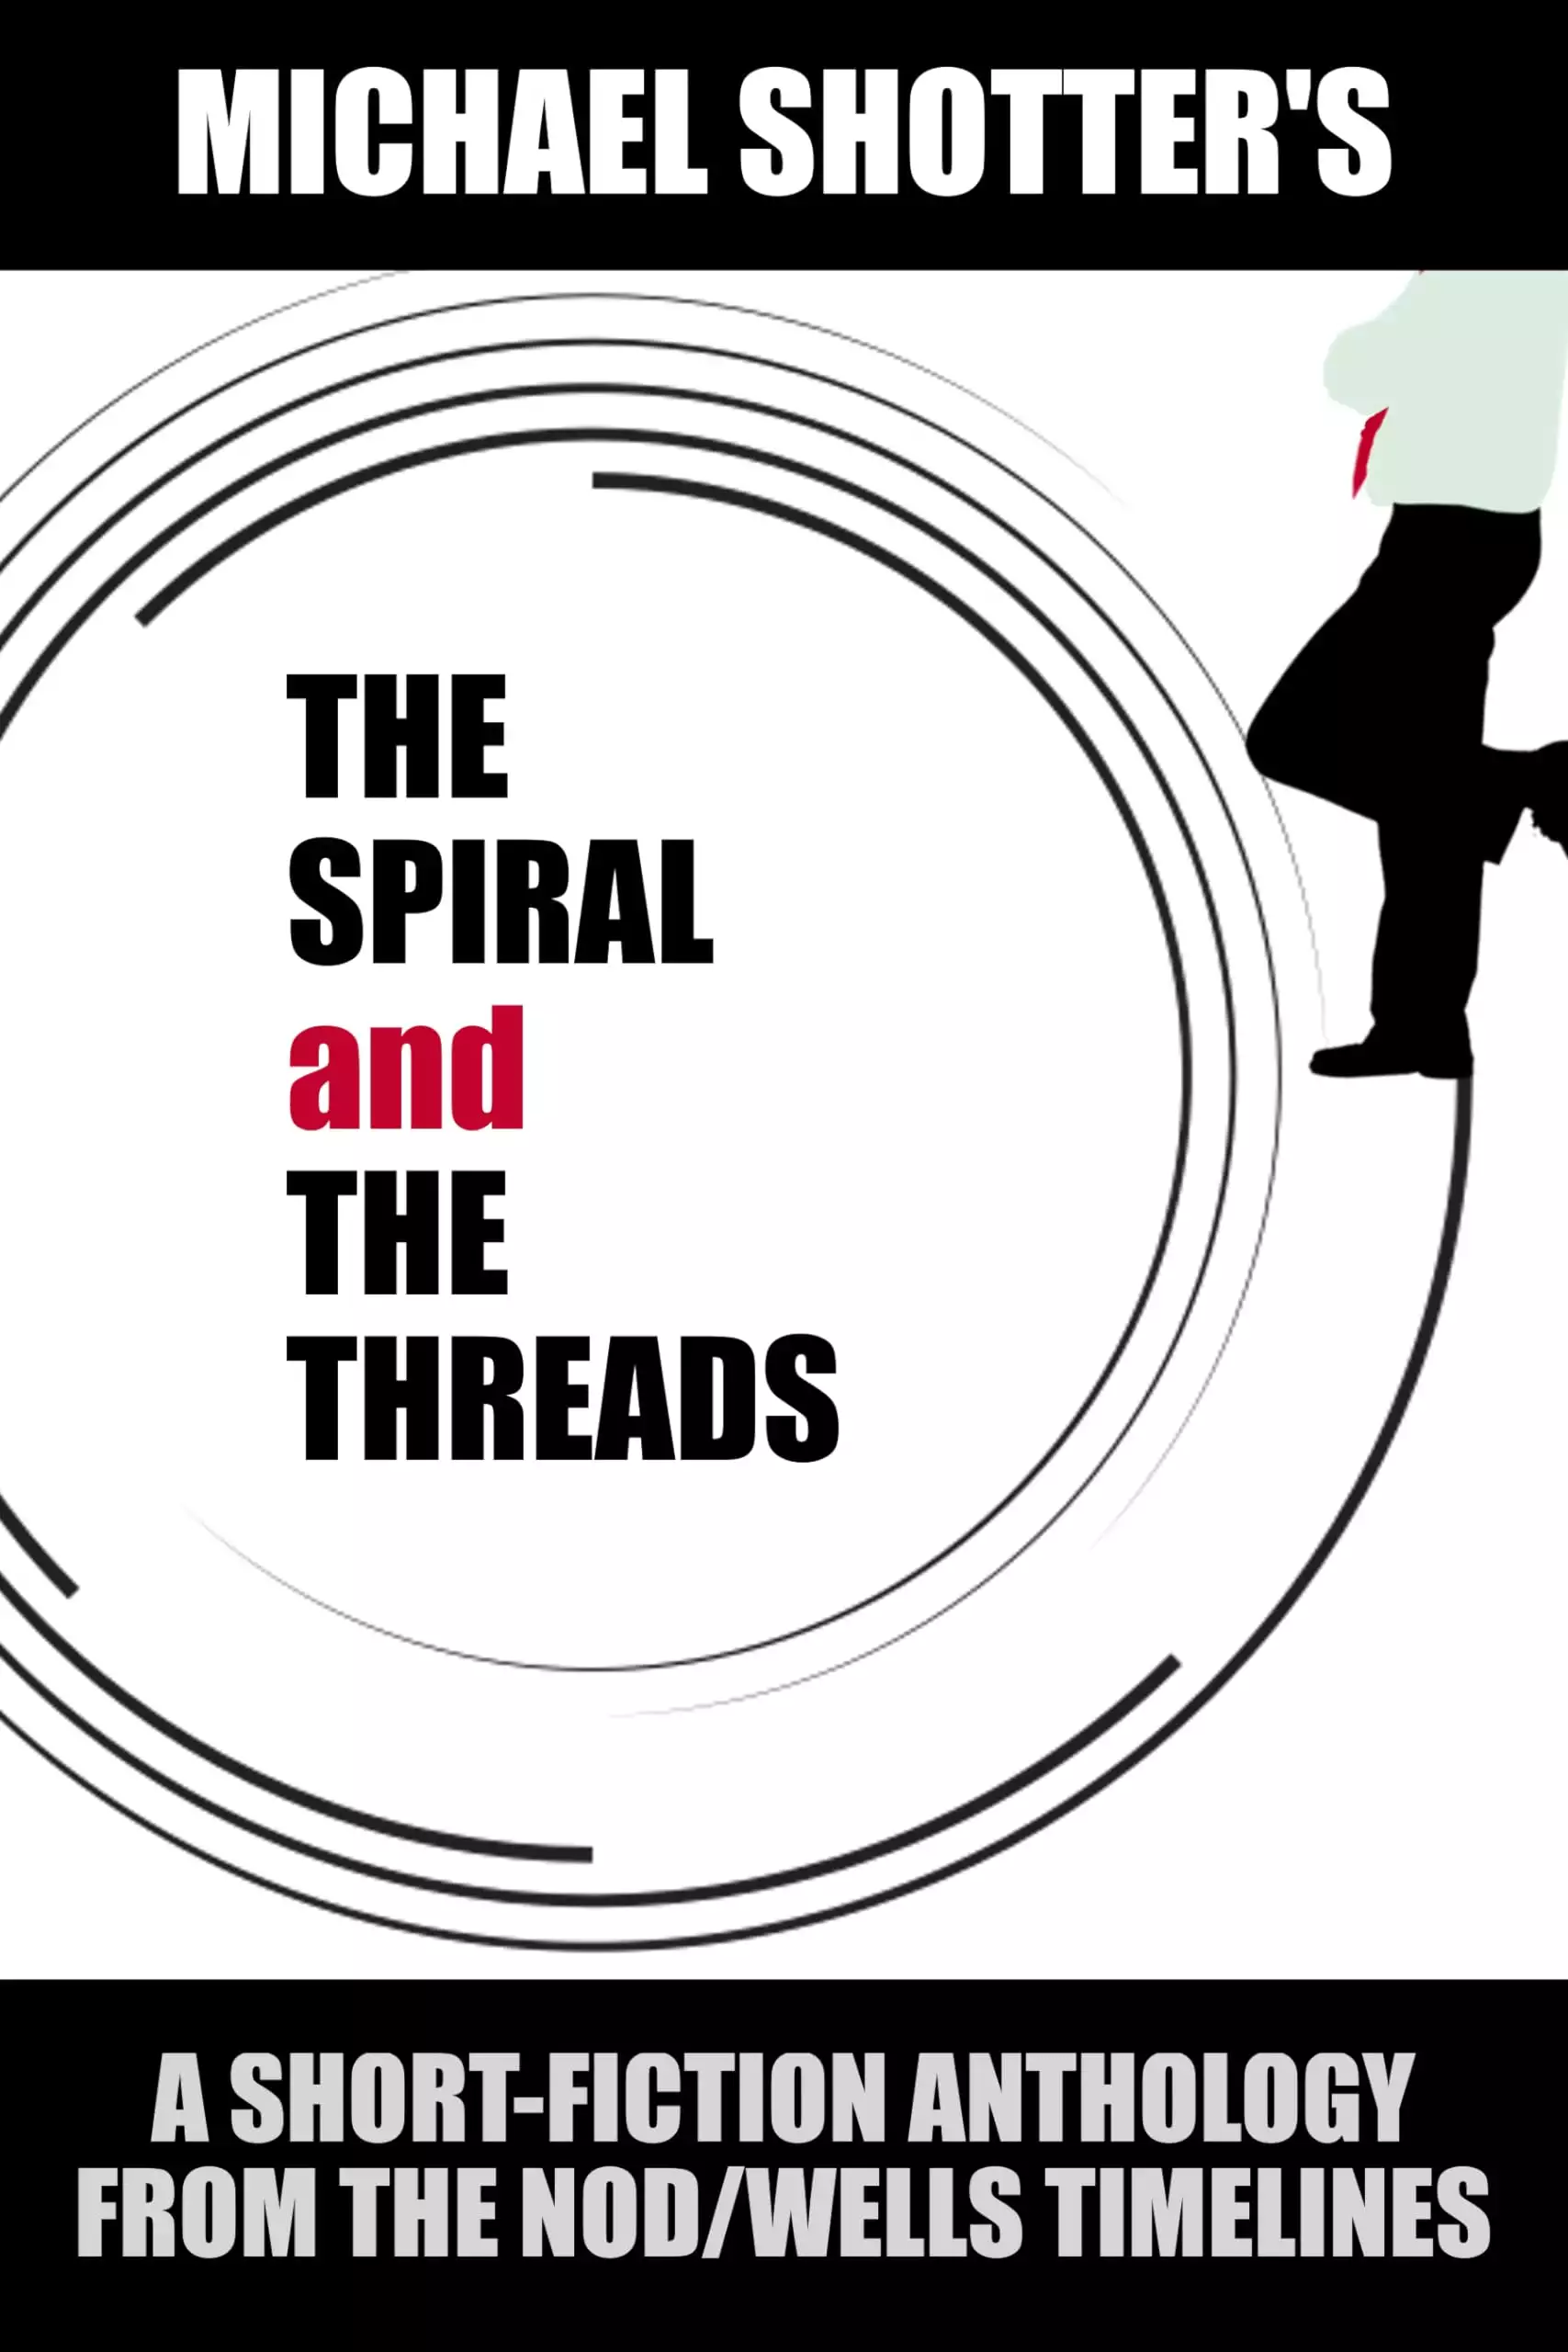 The Spiral and The Threads: A Short-Fiction Anthology from The Nod/Wells Timelines